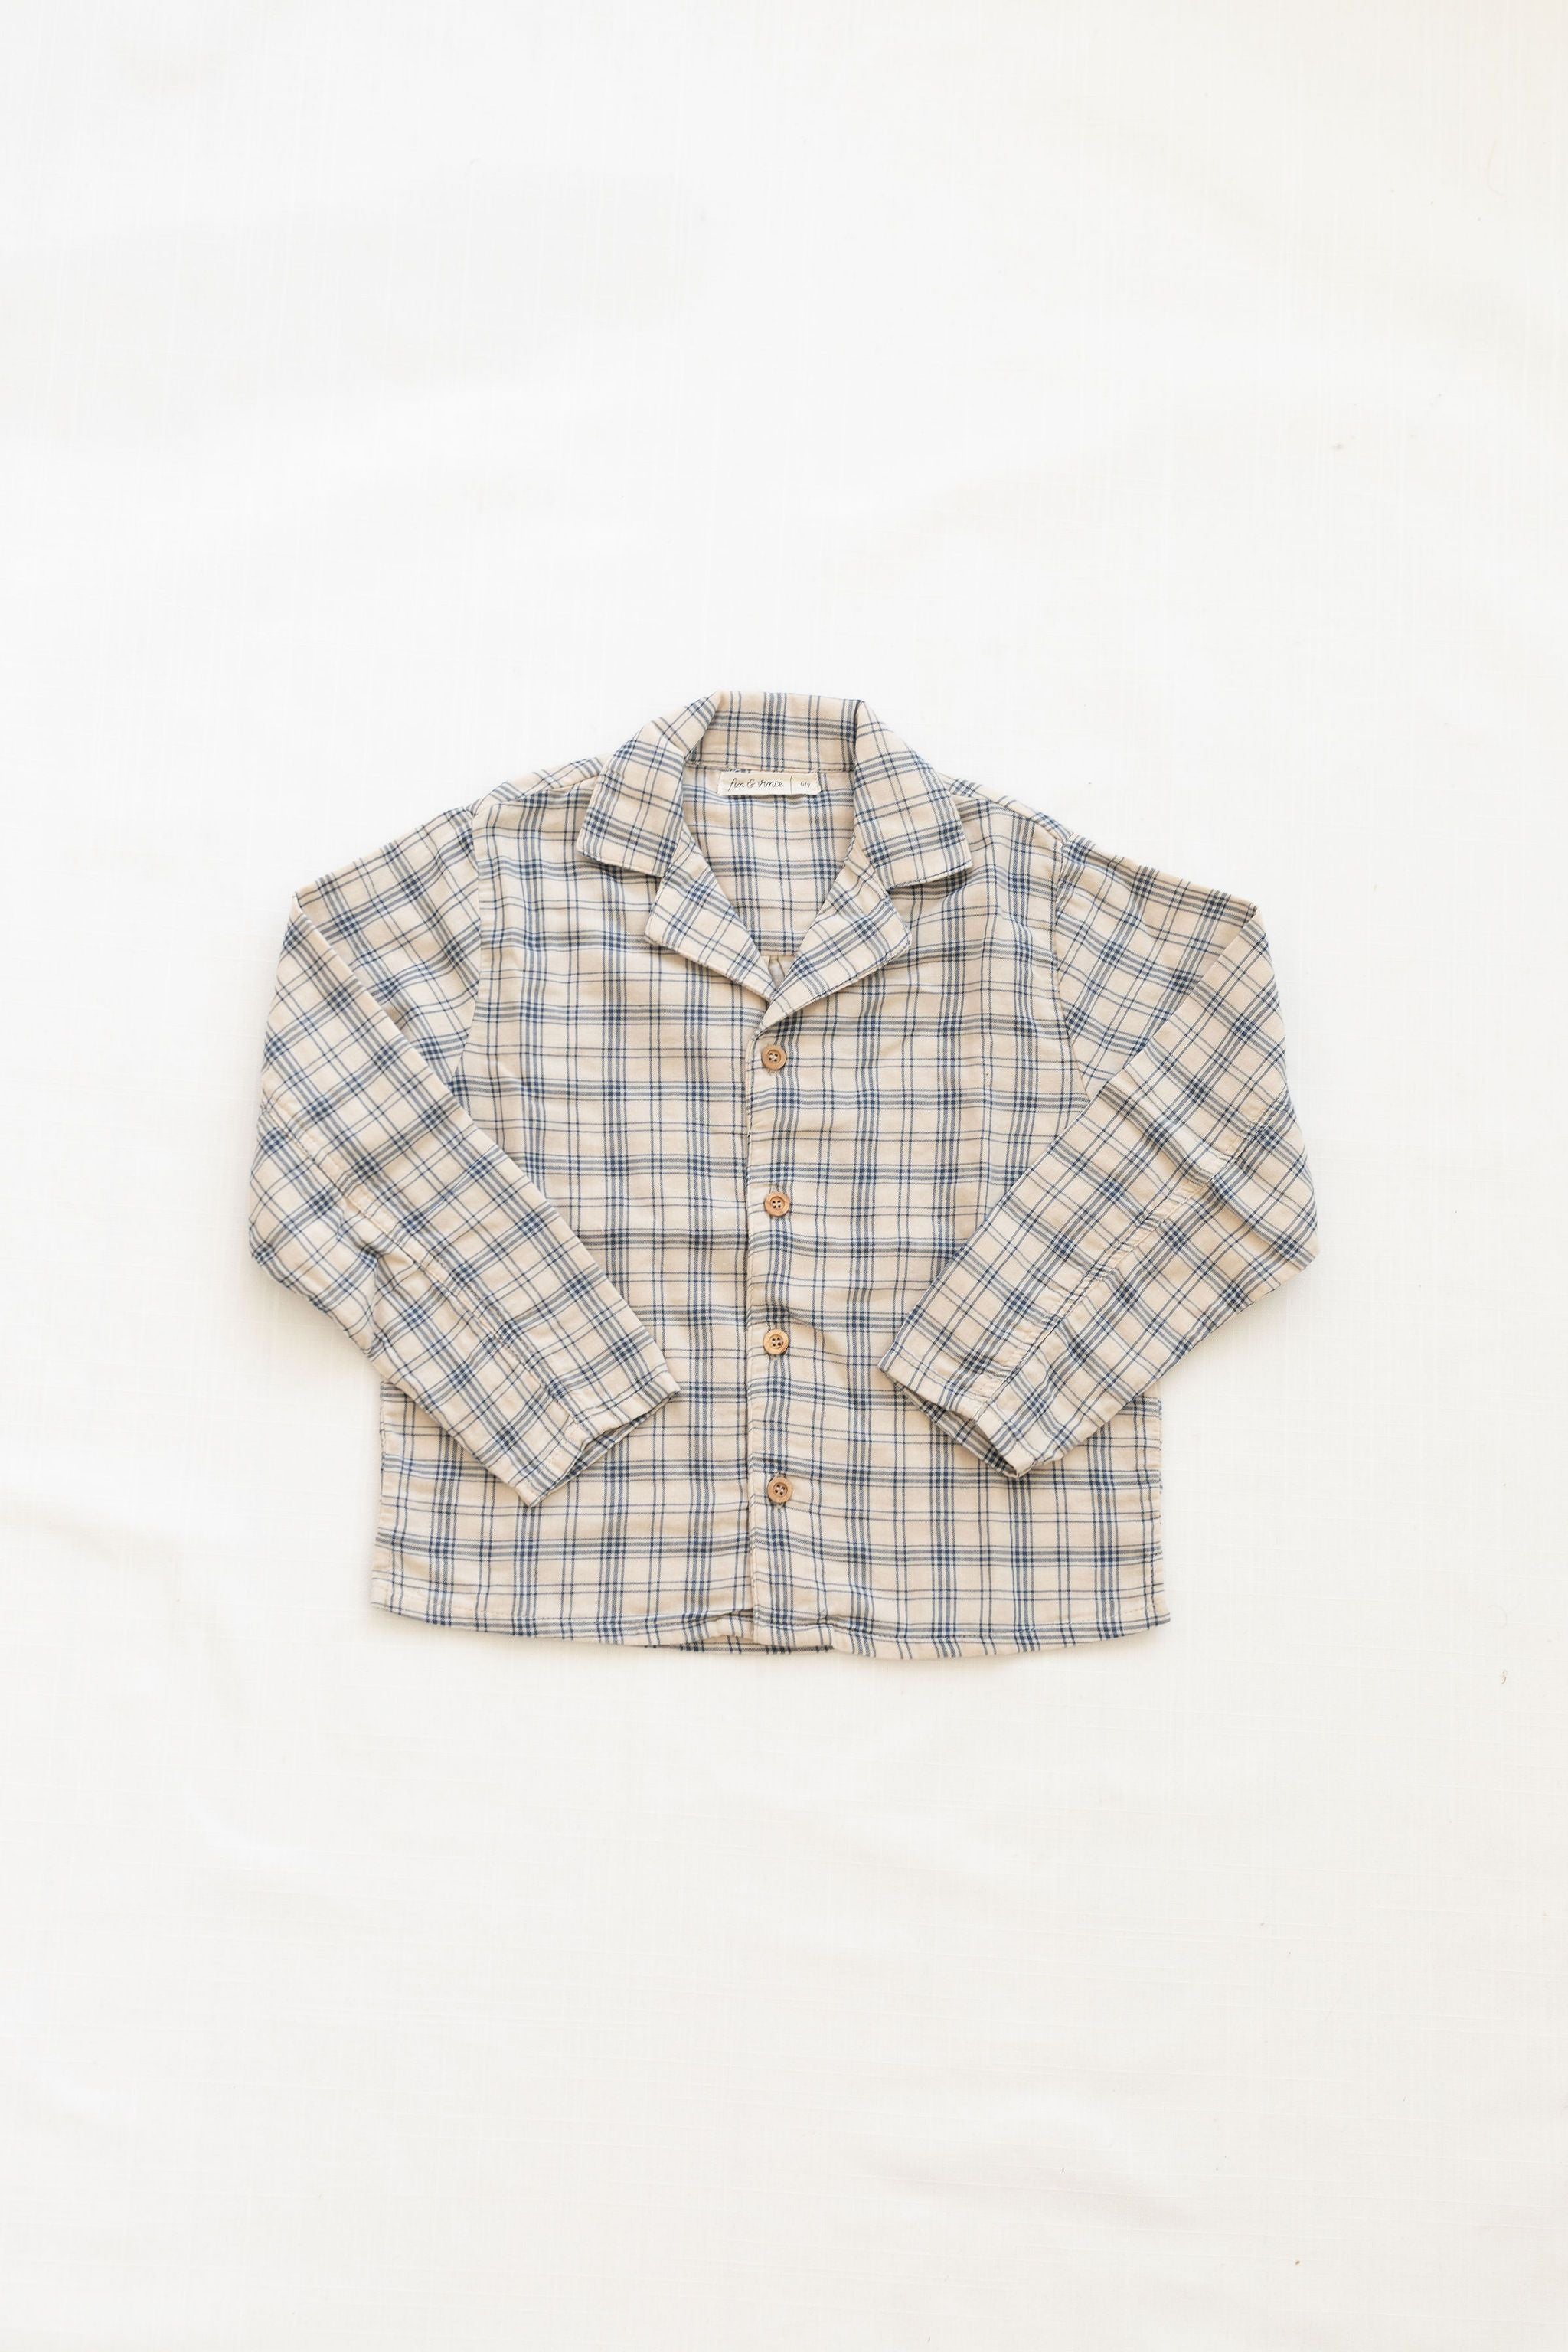 Fin and Vince Button Up in Navy Plaid | 30% OFF SALE | Children of the Wild